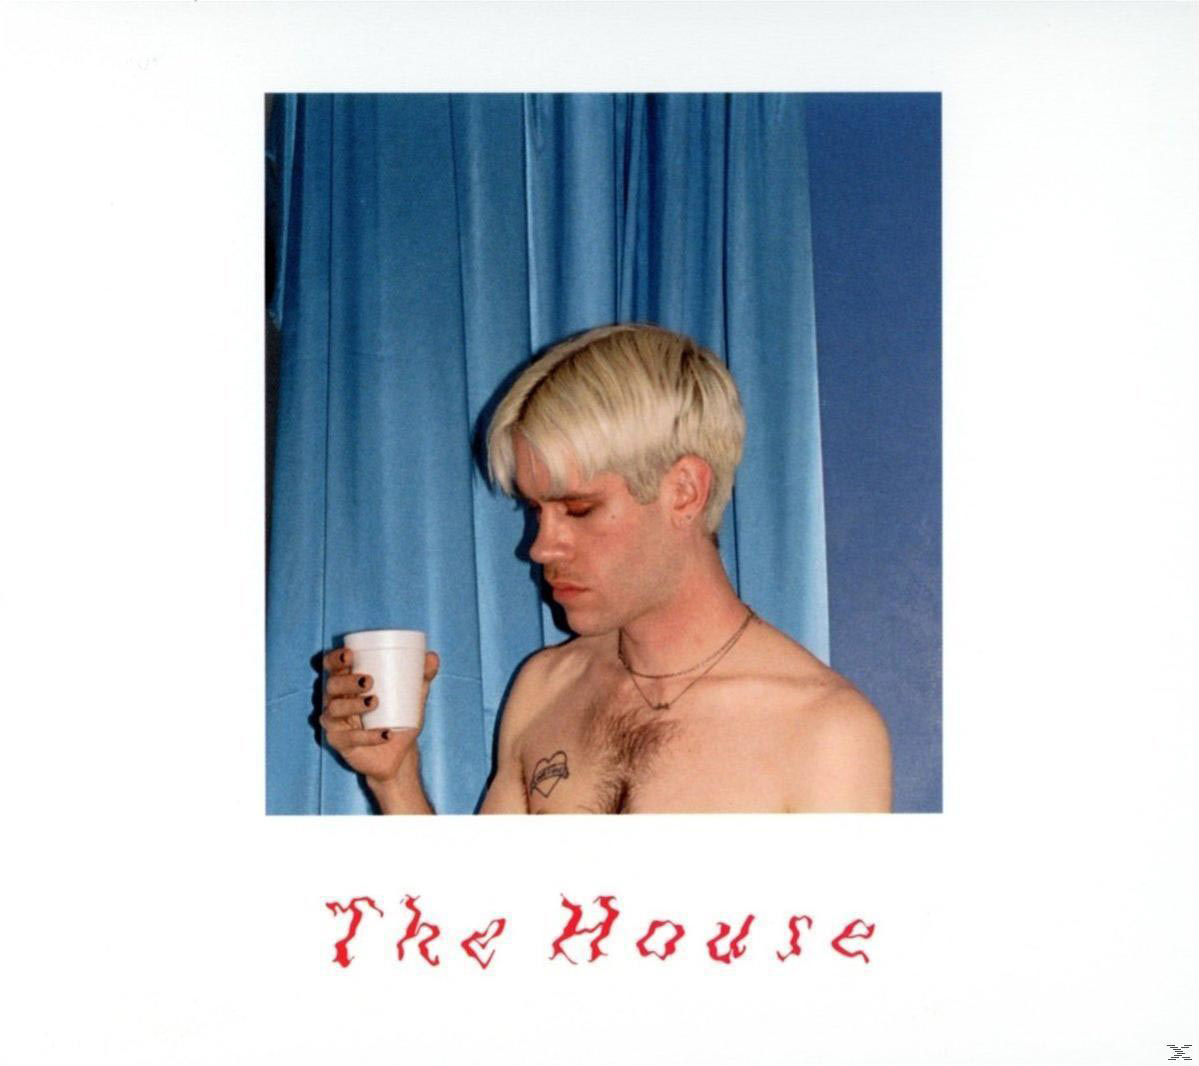 (CD) The House - - Porches